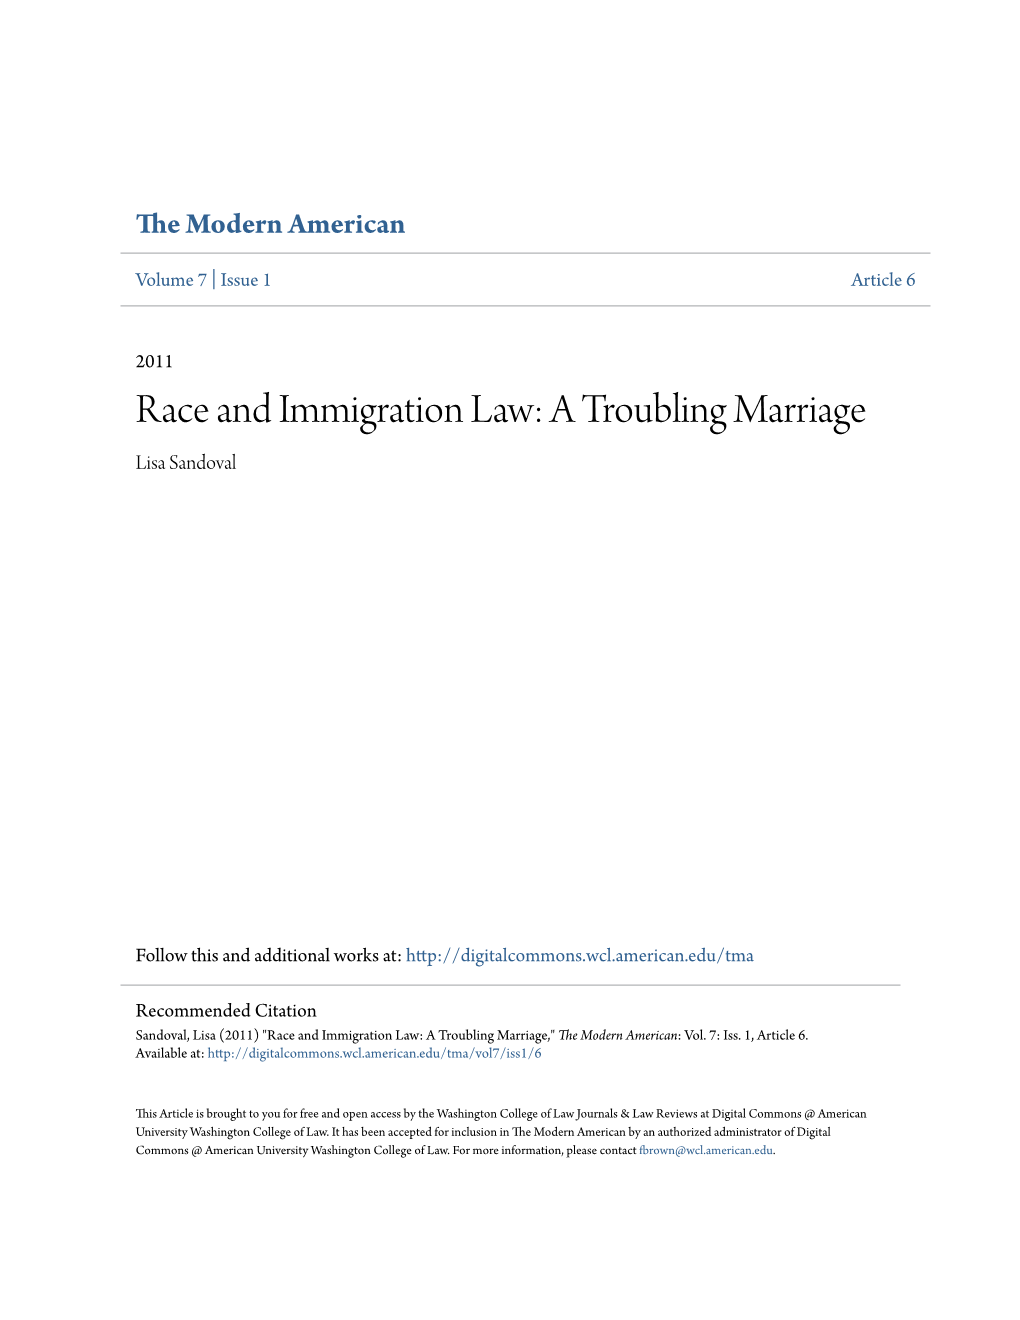 Race and Immigration Law: a Troubling Marriage Lisa Sandoval